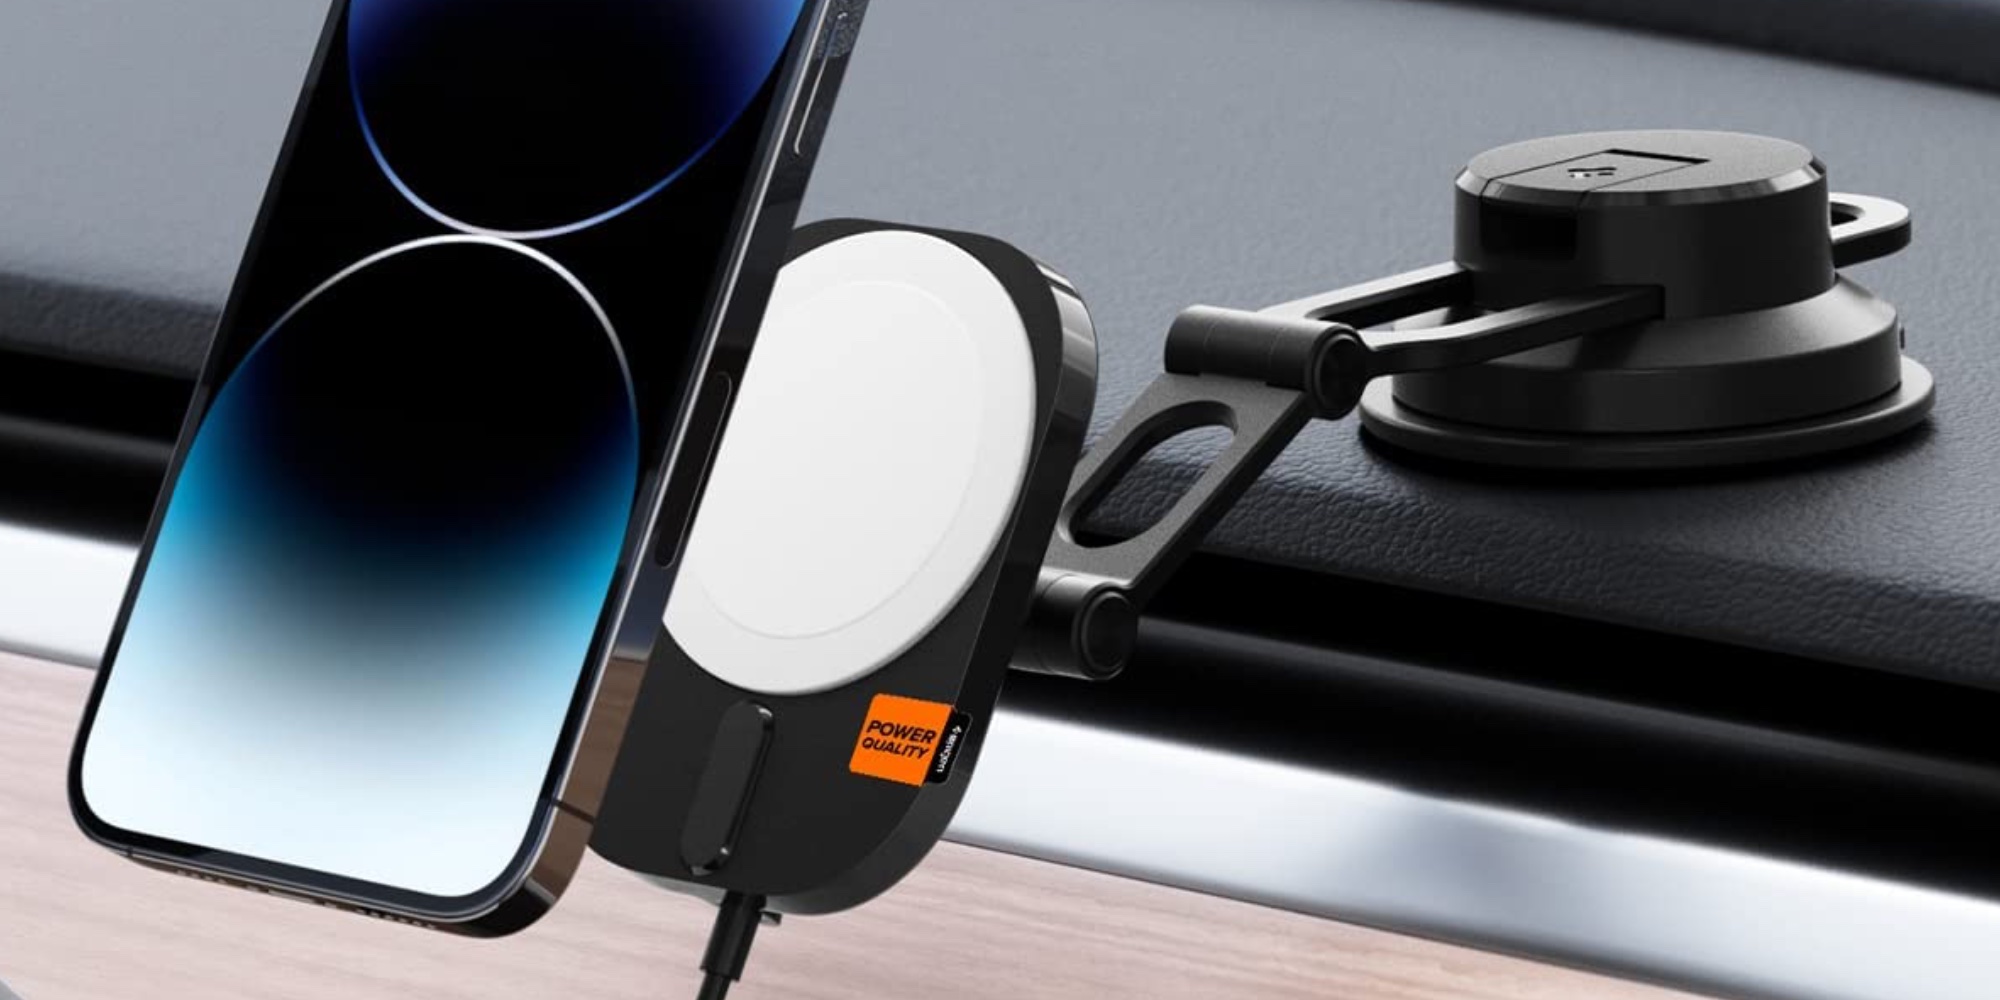 Satechi MagSafe Car Charger debuts alongside two releases - 9to5Toys